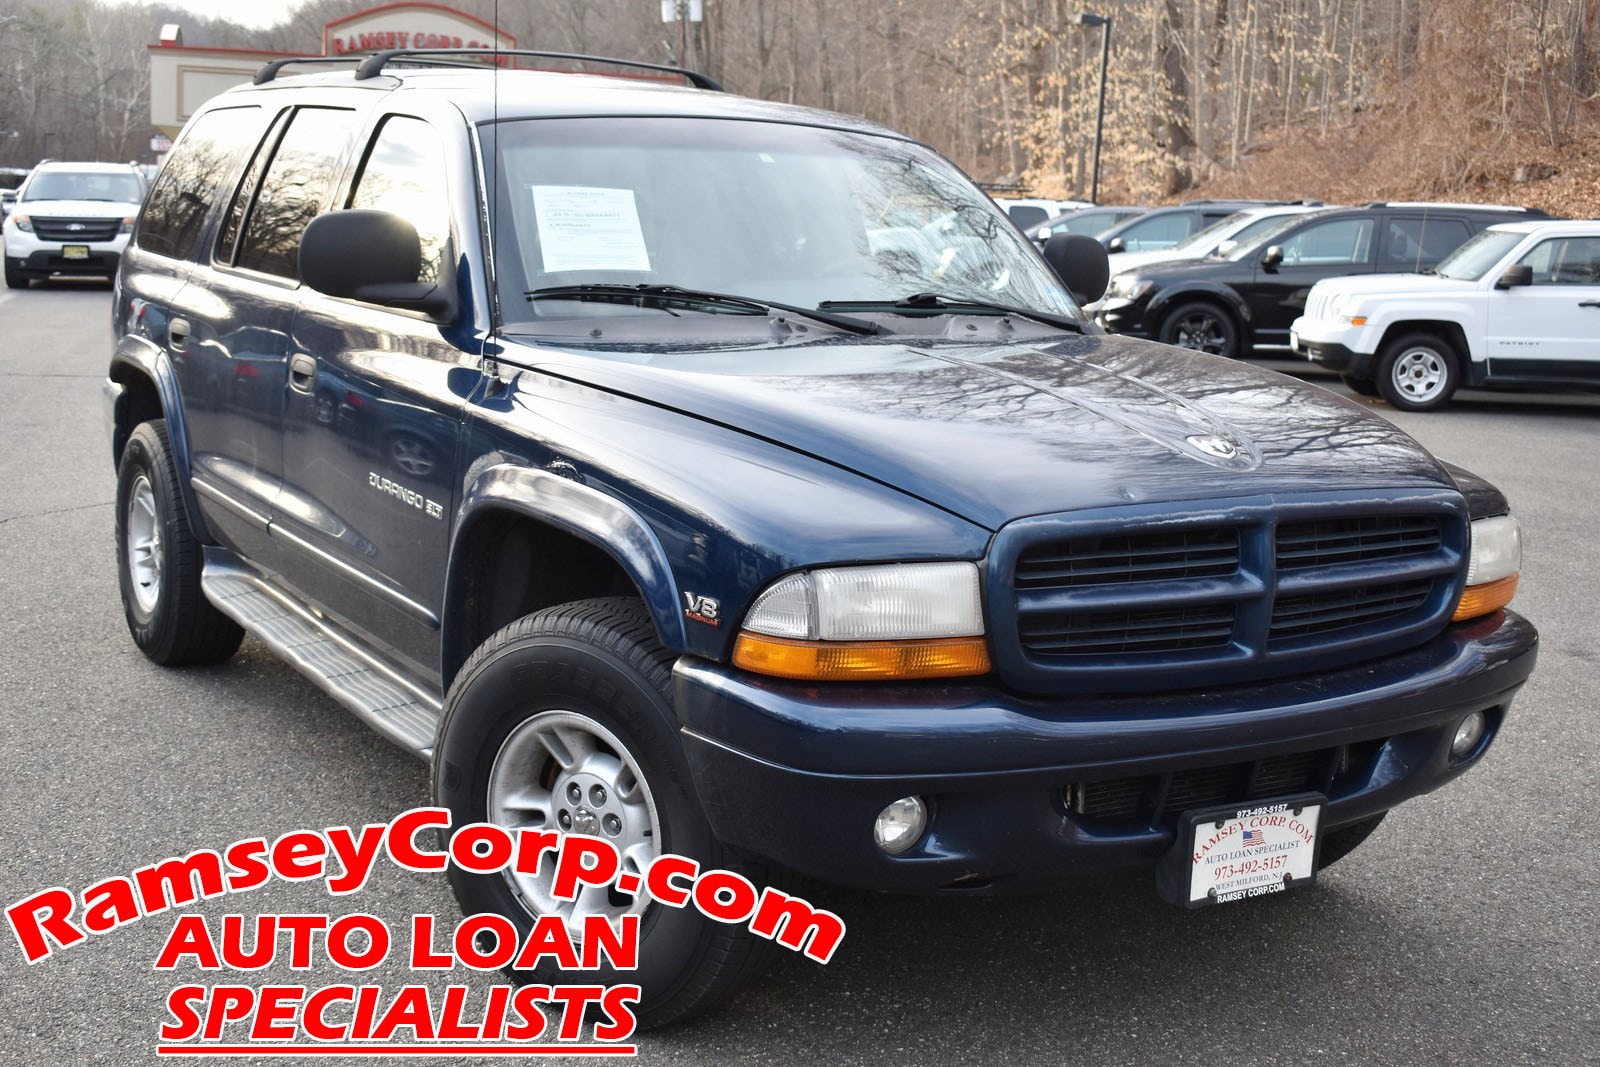 Used 2000 Dodge Durango For Sale at Ramsey Corp. | VIN: 1B4HS28NXYF200866